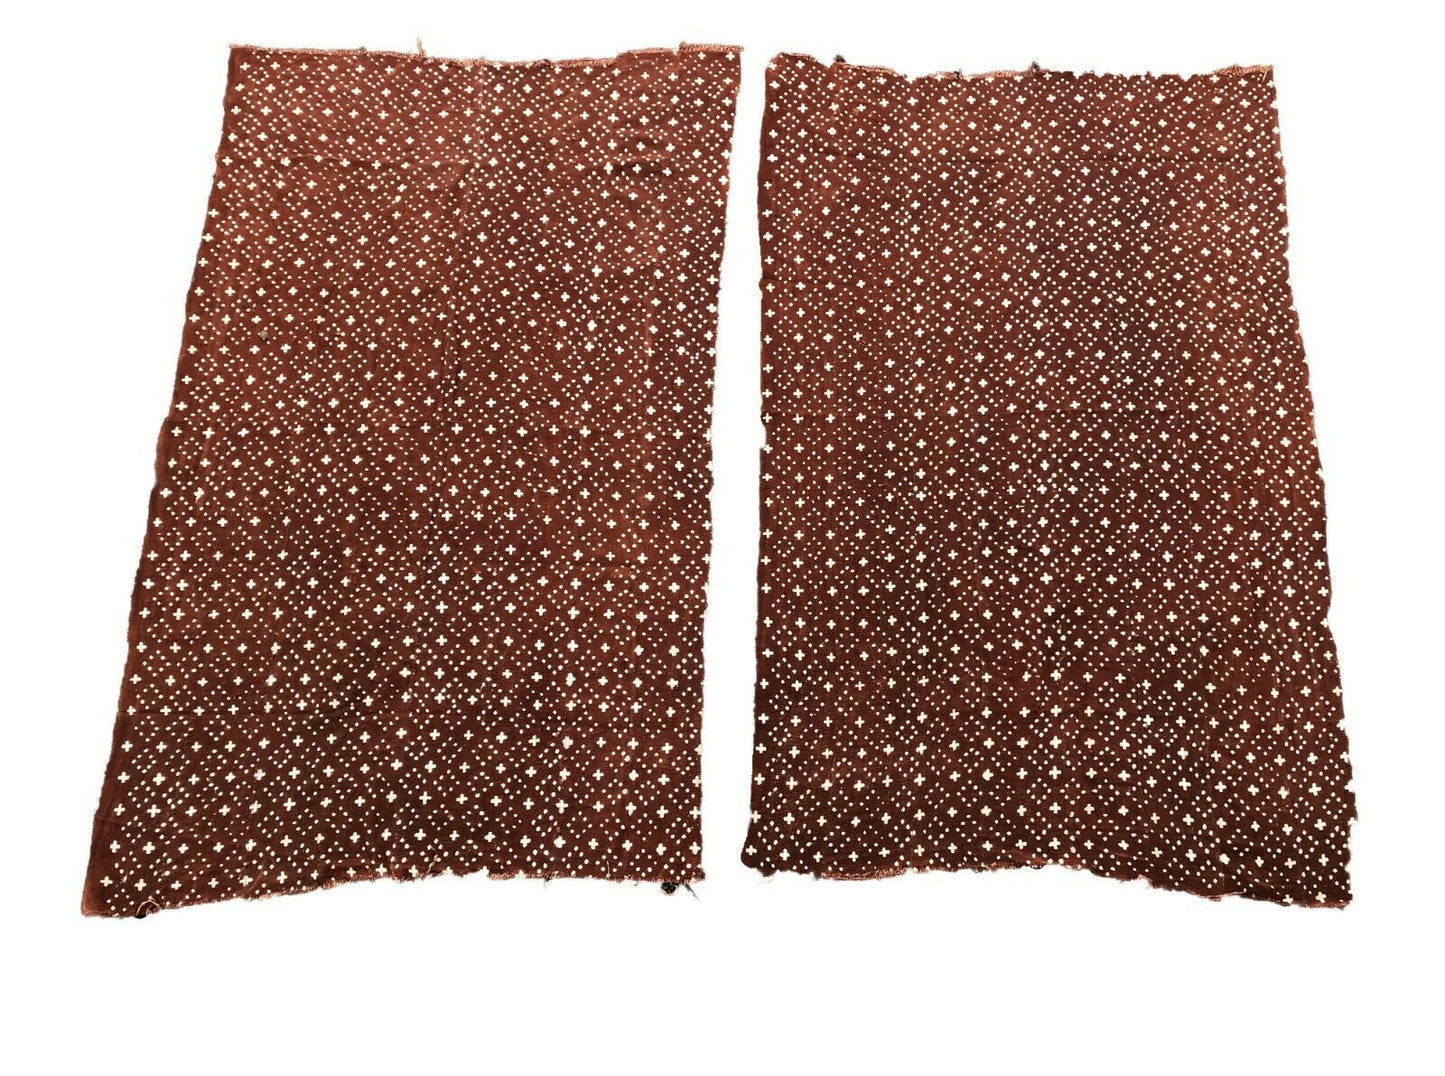 Pair Of African Bogolan Textile Brown and white Mud Cloth  66" by 42" # 400